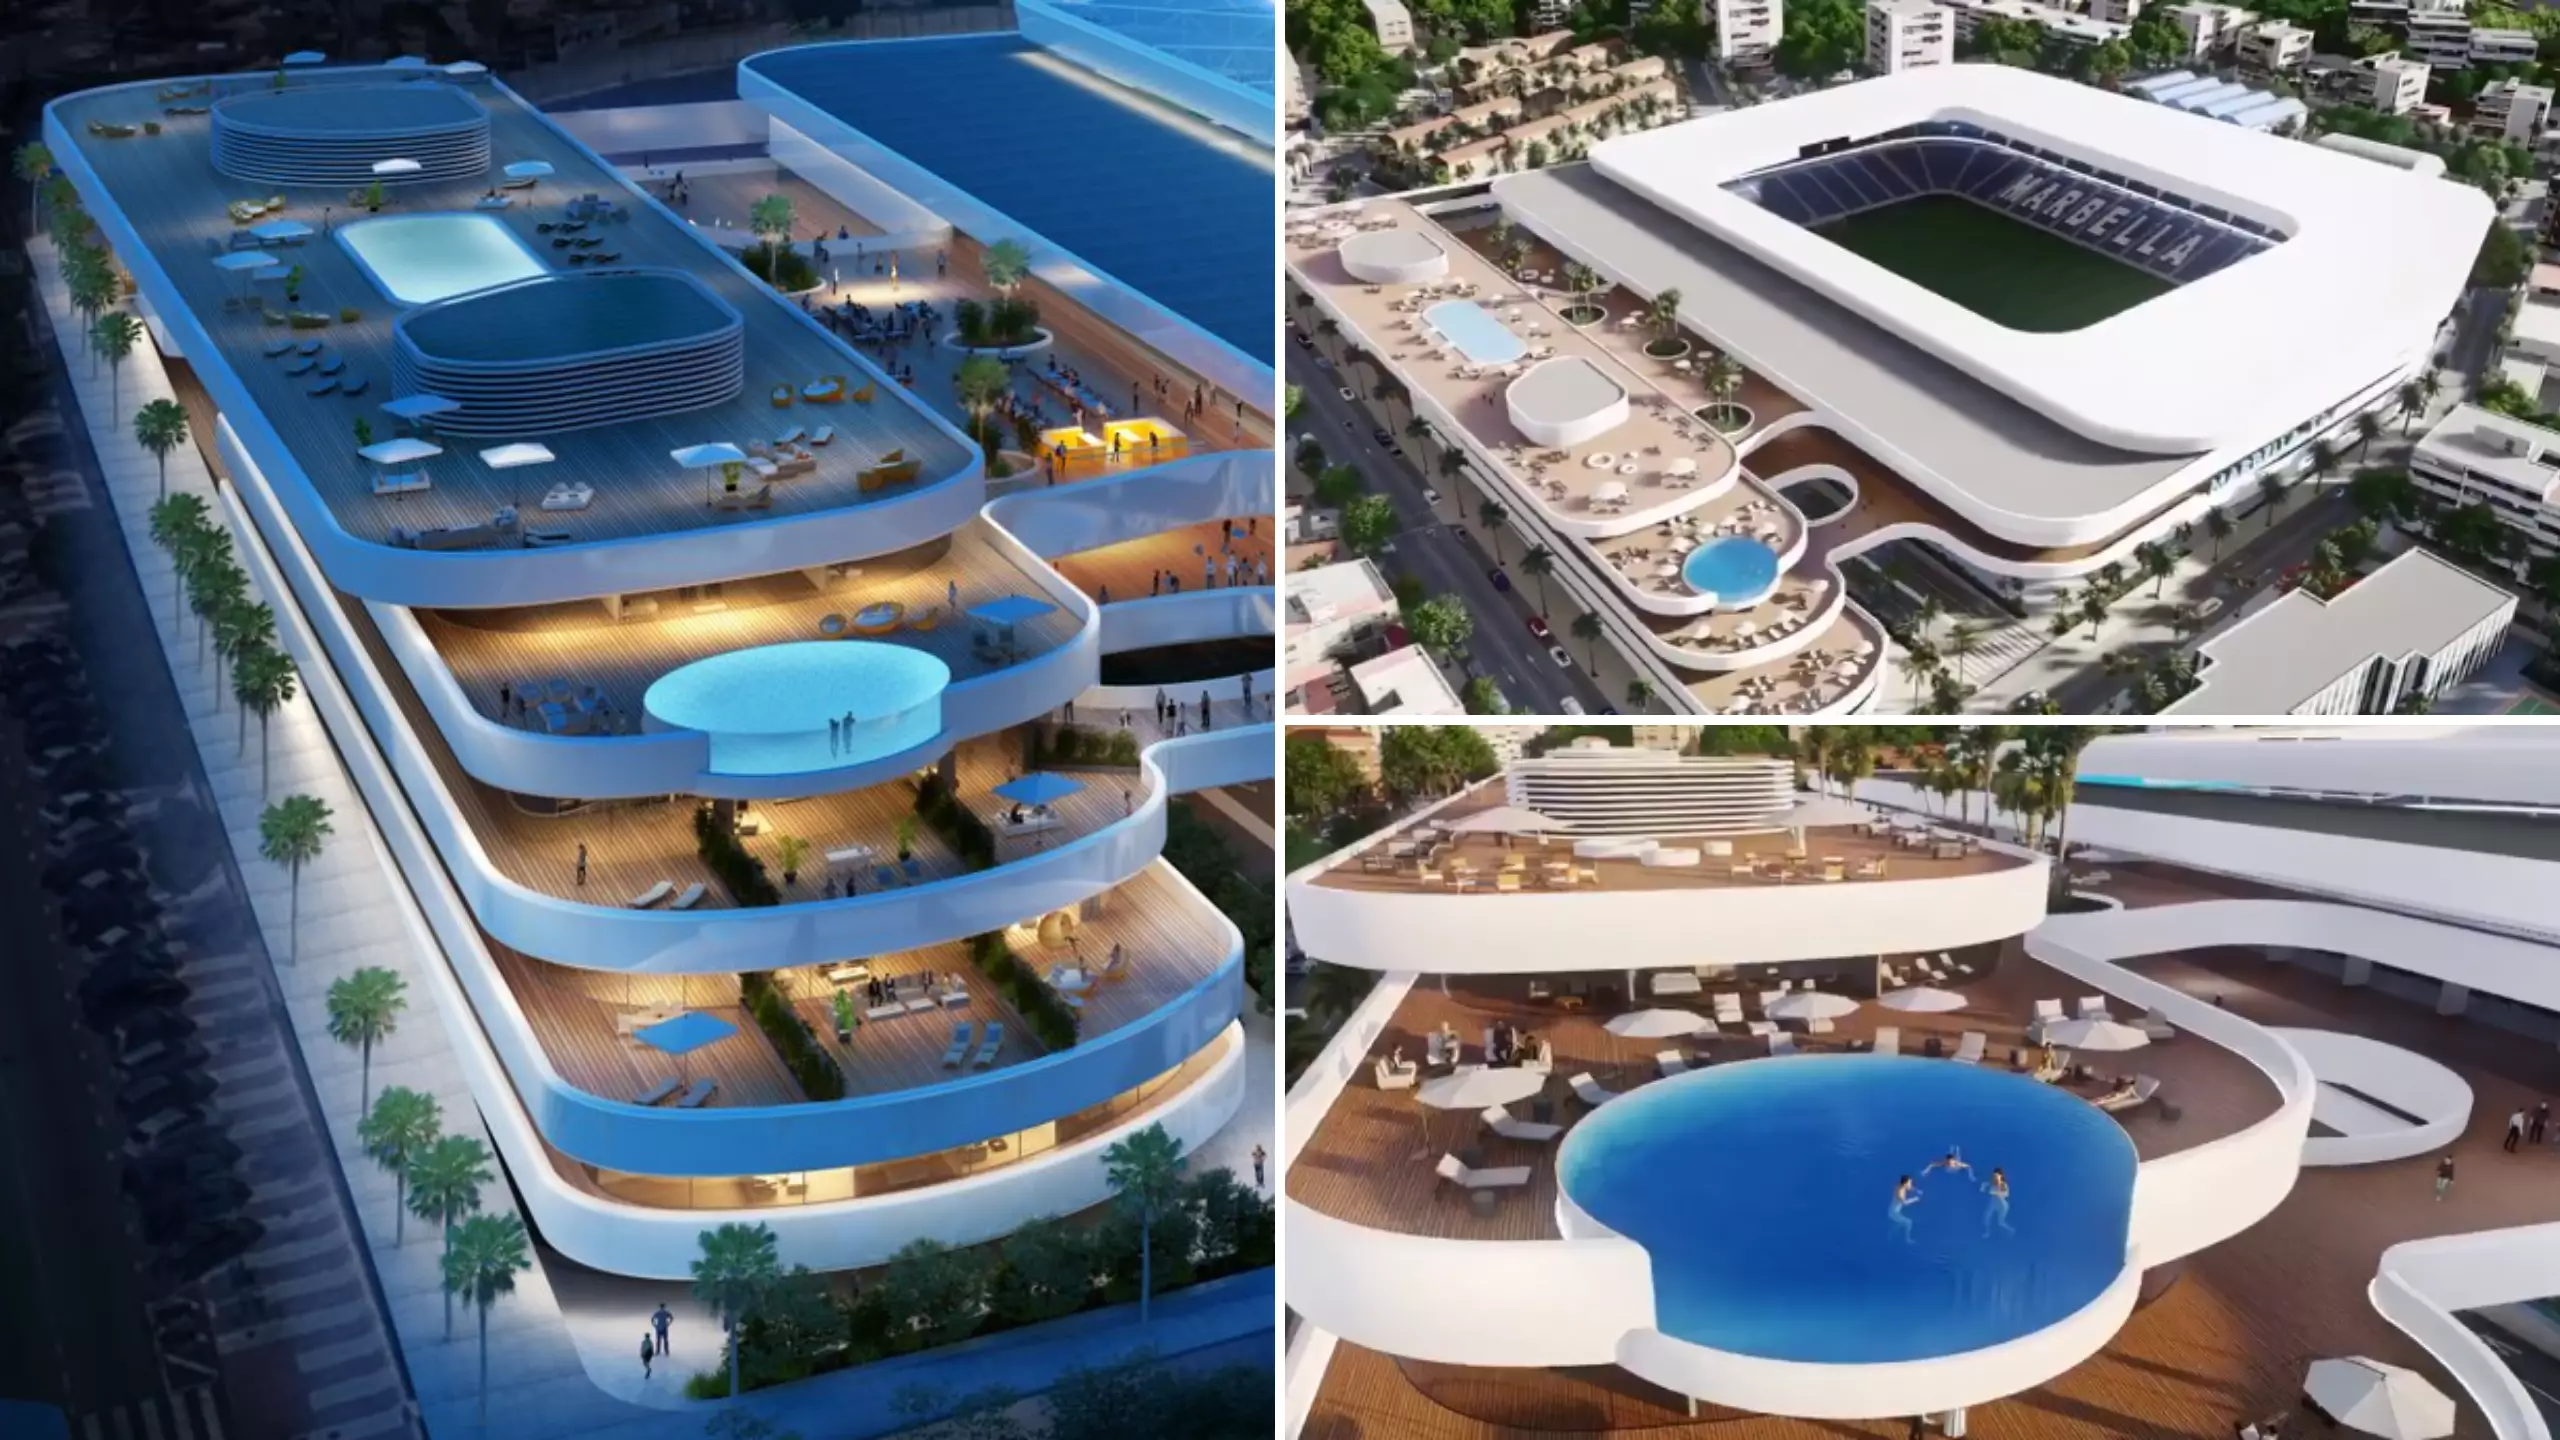 Marbella FC Reveal Plans For Insane 18,000-Seater Stadium With Swimming Pools And Hotel Attached